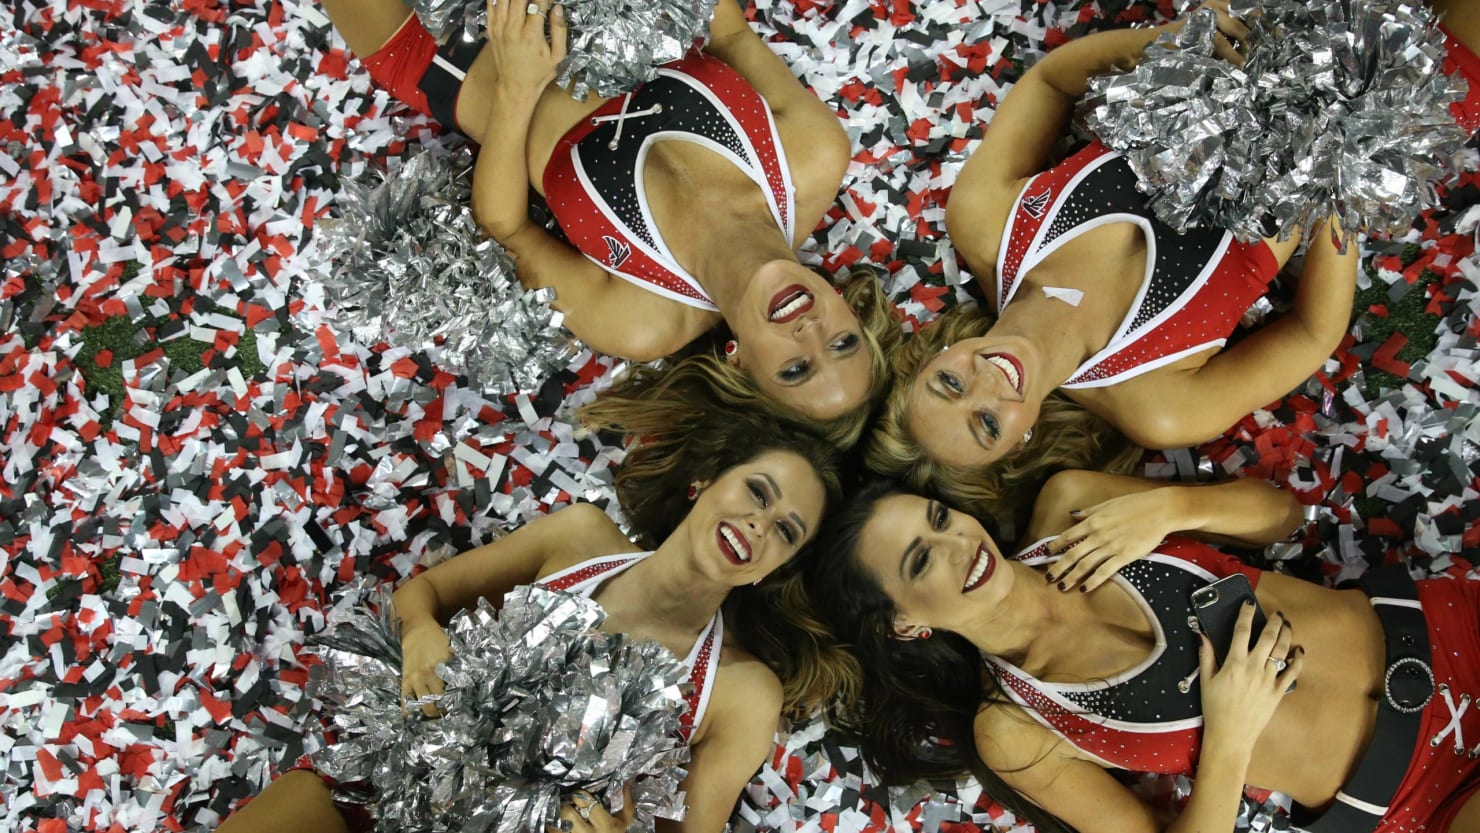 NFL Teams Have 'Secret' Cheerleader Squads That Are Rife ...